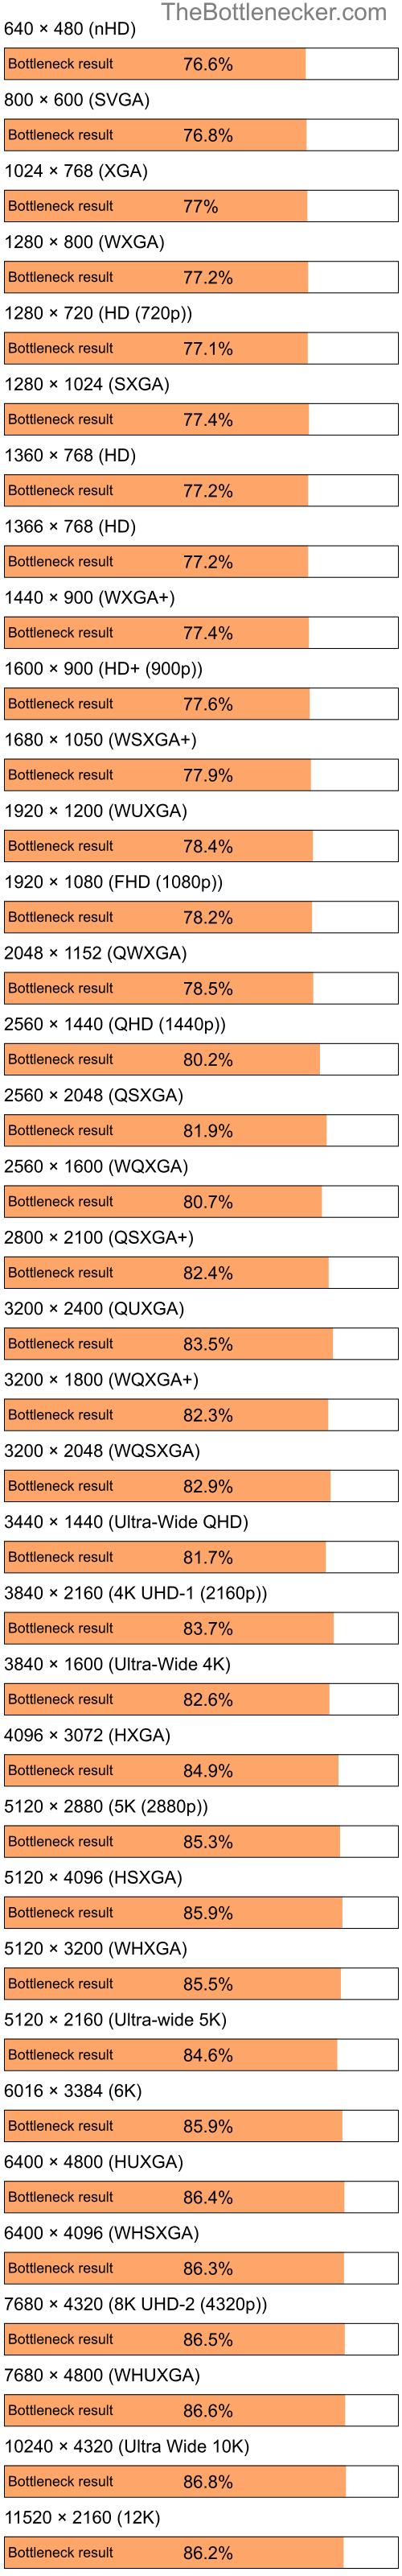 Bottleneck results by resolution for Intel Celeron M and AMD Mobility Radeon 9700 in General Tasks